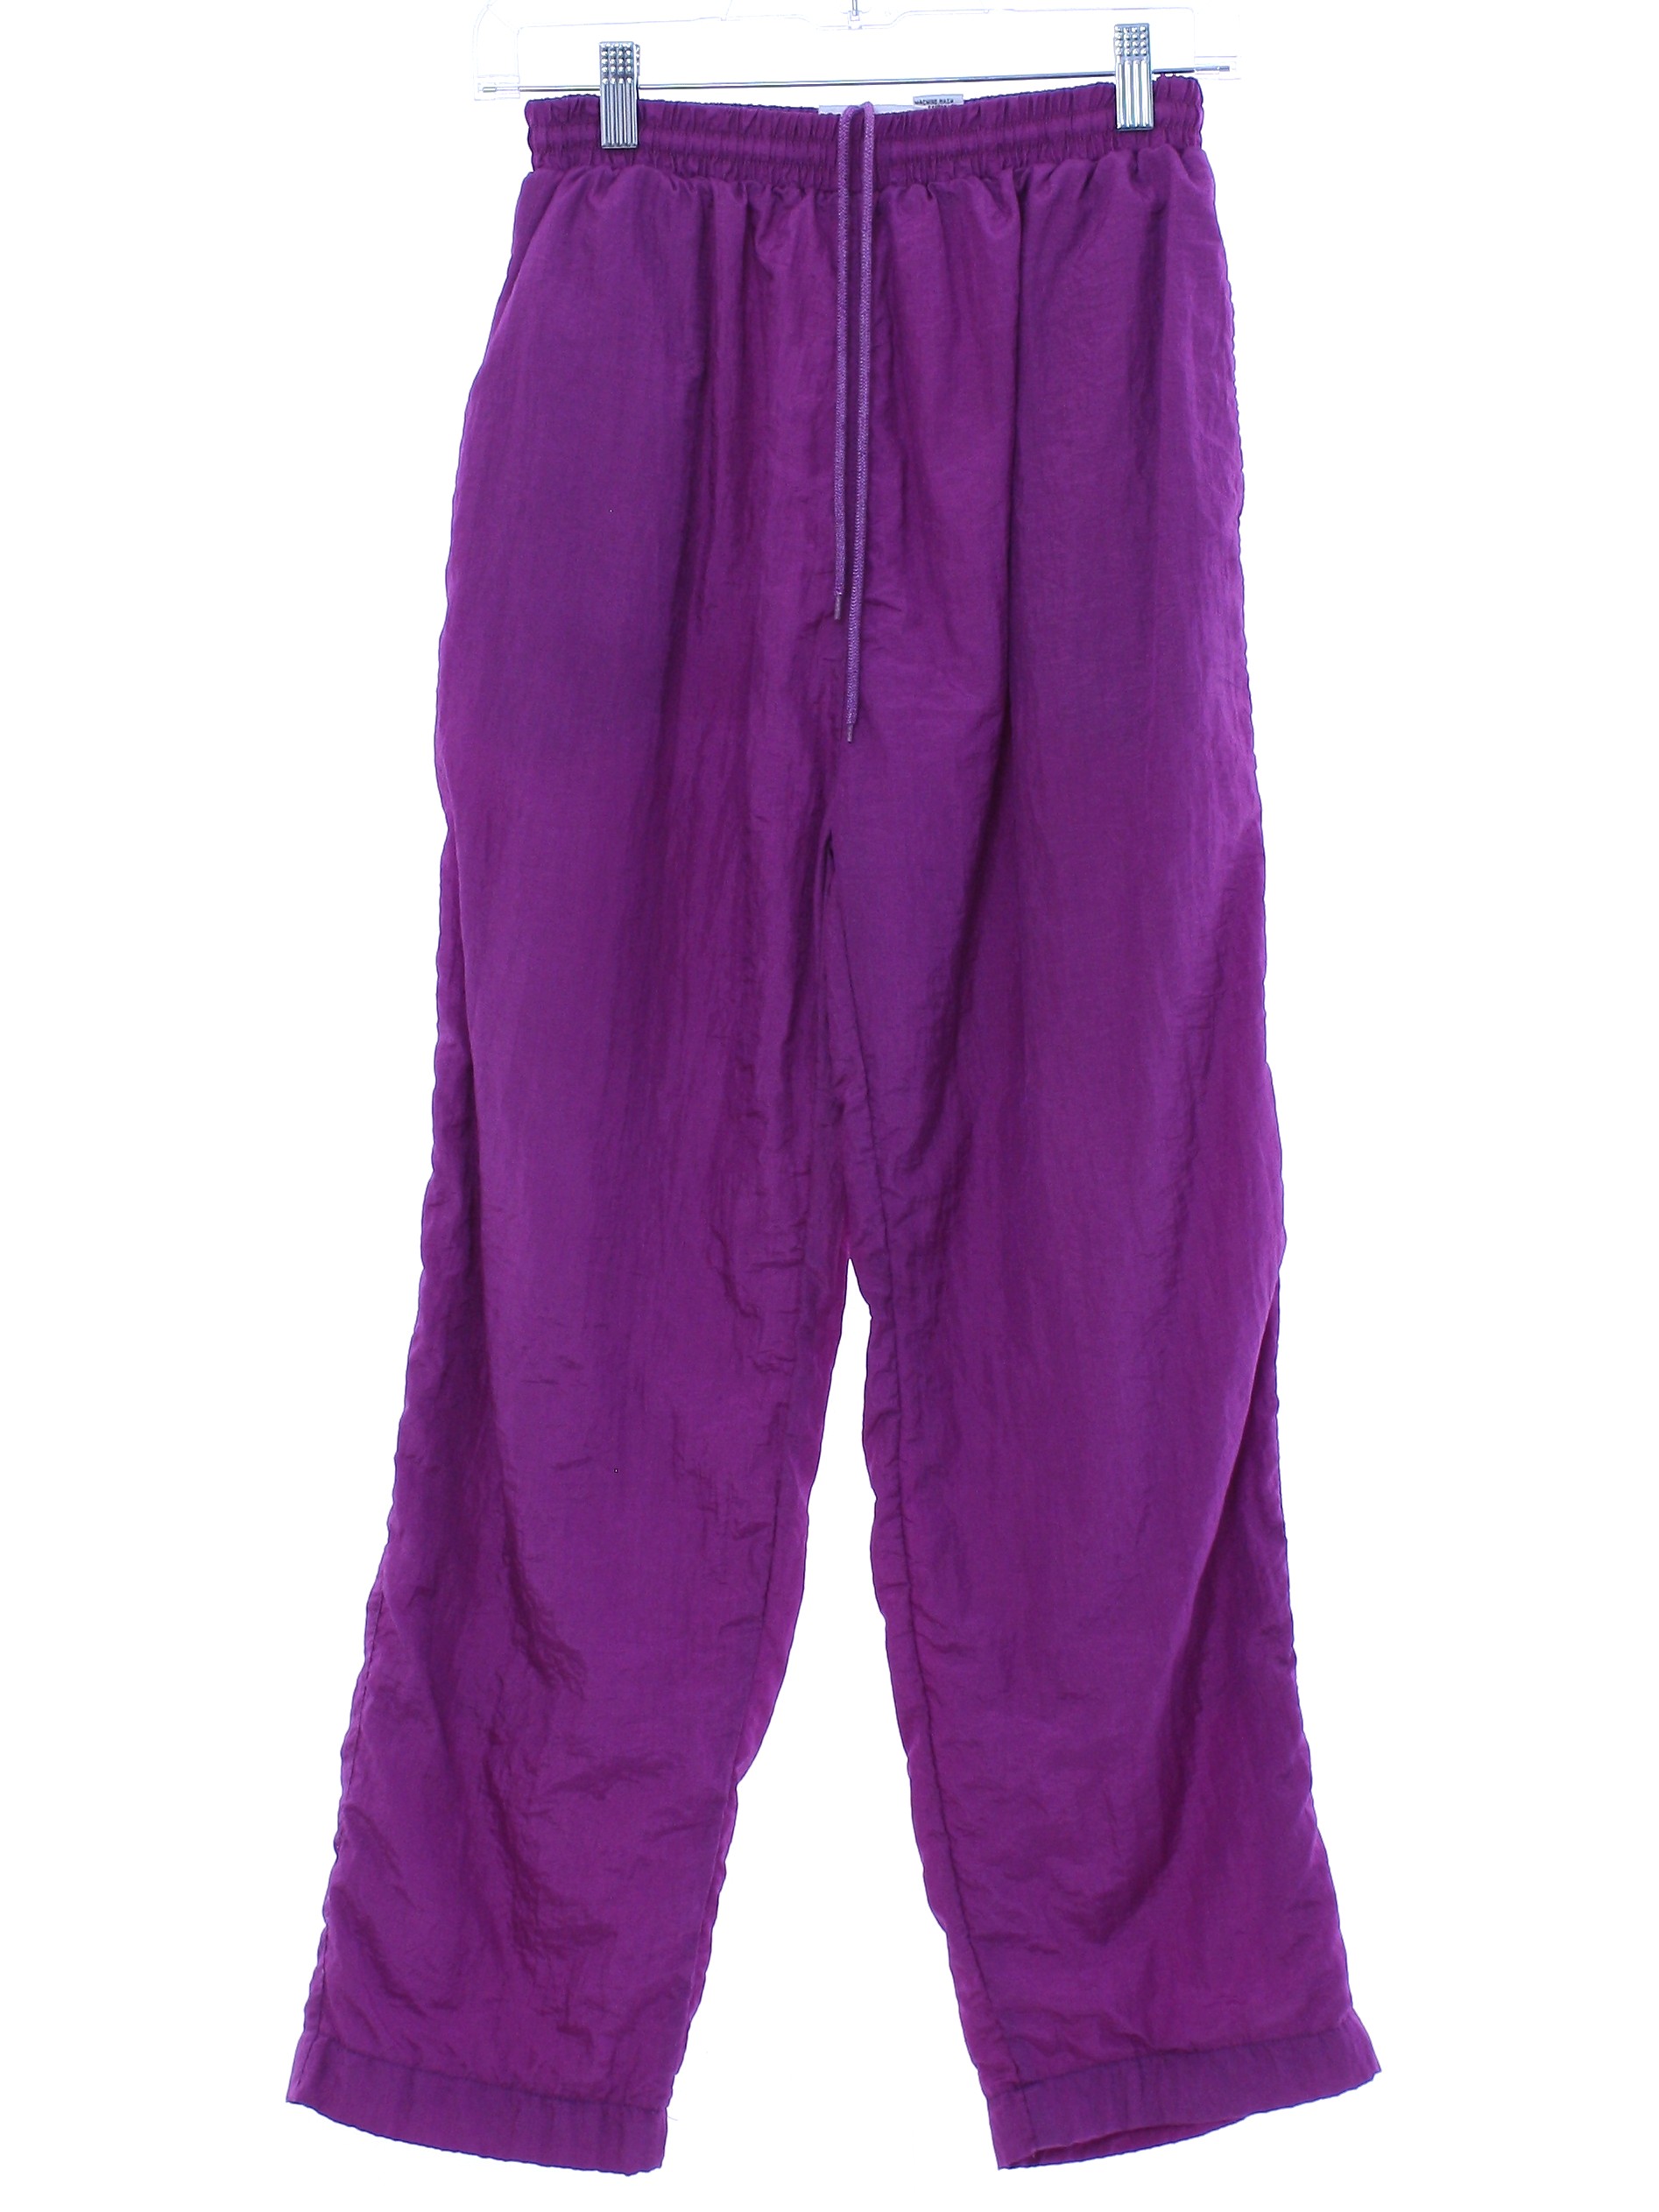 Eighties Vintage Pants: 80s -Active Attitudes- Womens orchid sheeny nylon track  pants with cotton and polyester blend lining. Elastic pull on waistband  with front inside drawstring ties and side inset pockets.